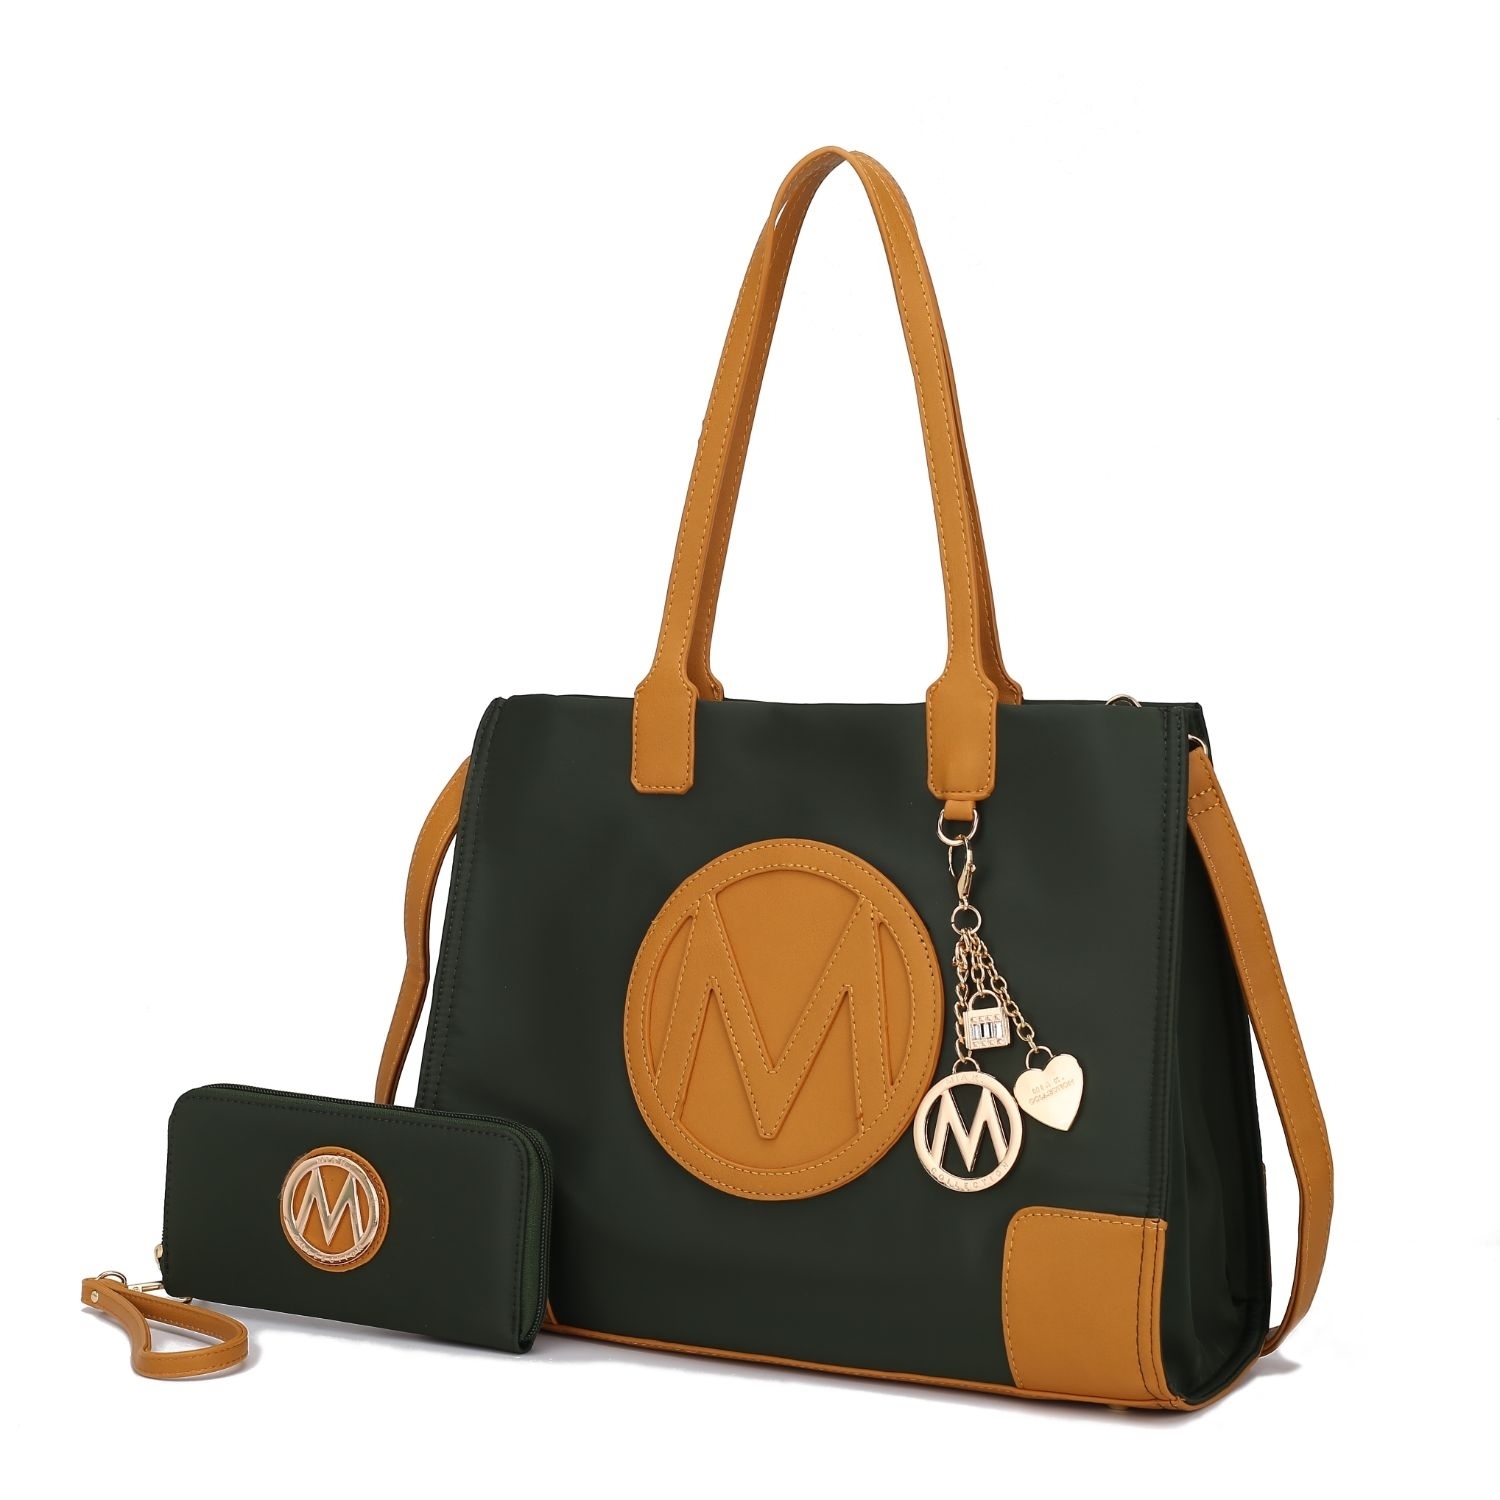 MKF Collection Louise Tote Handbag And Wallet Set By Mia K. - Olive Mustard